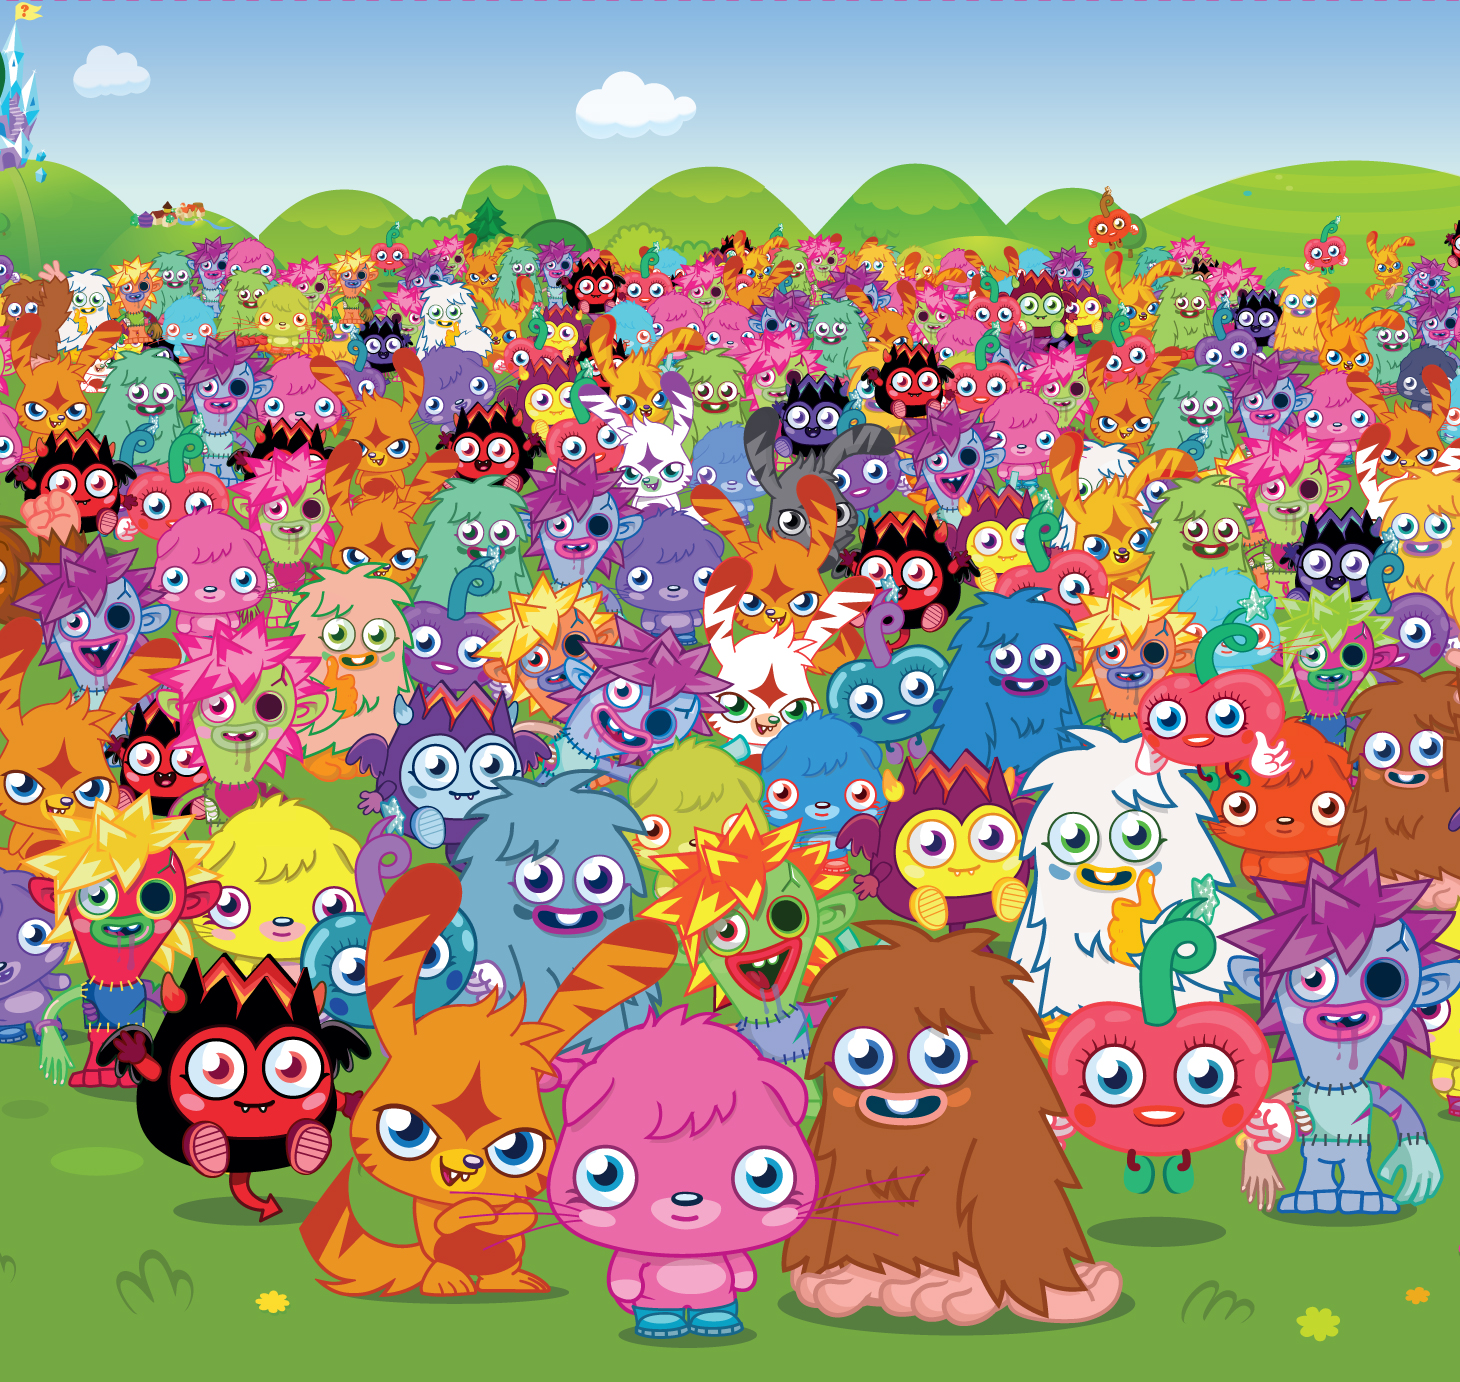 Us Times Square to Help Celebrate the Launch of Moshi Monsters